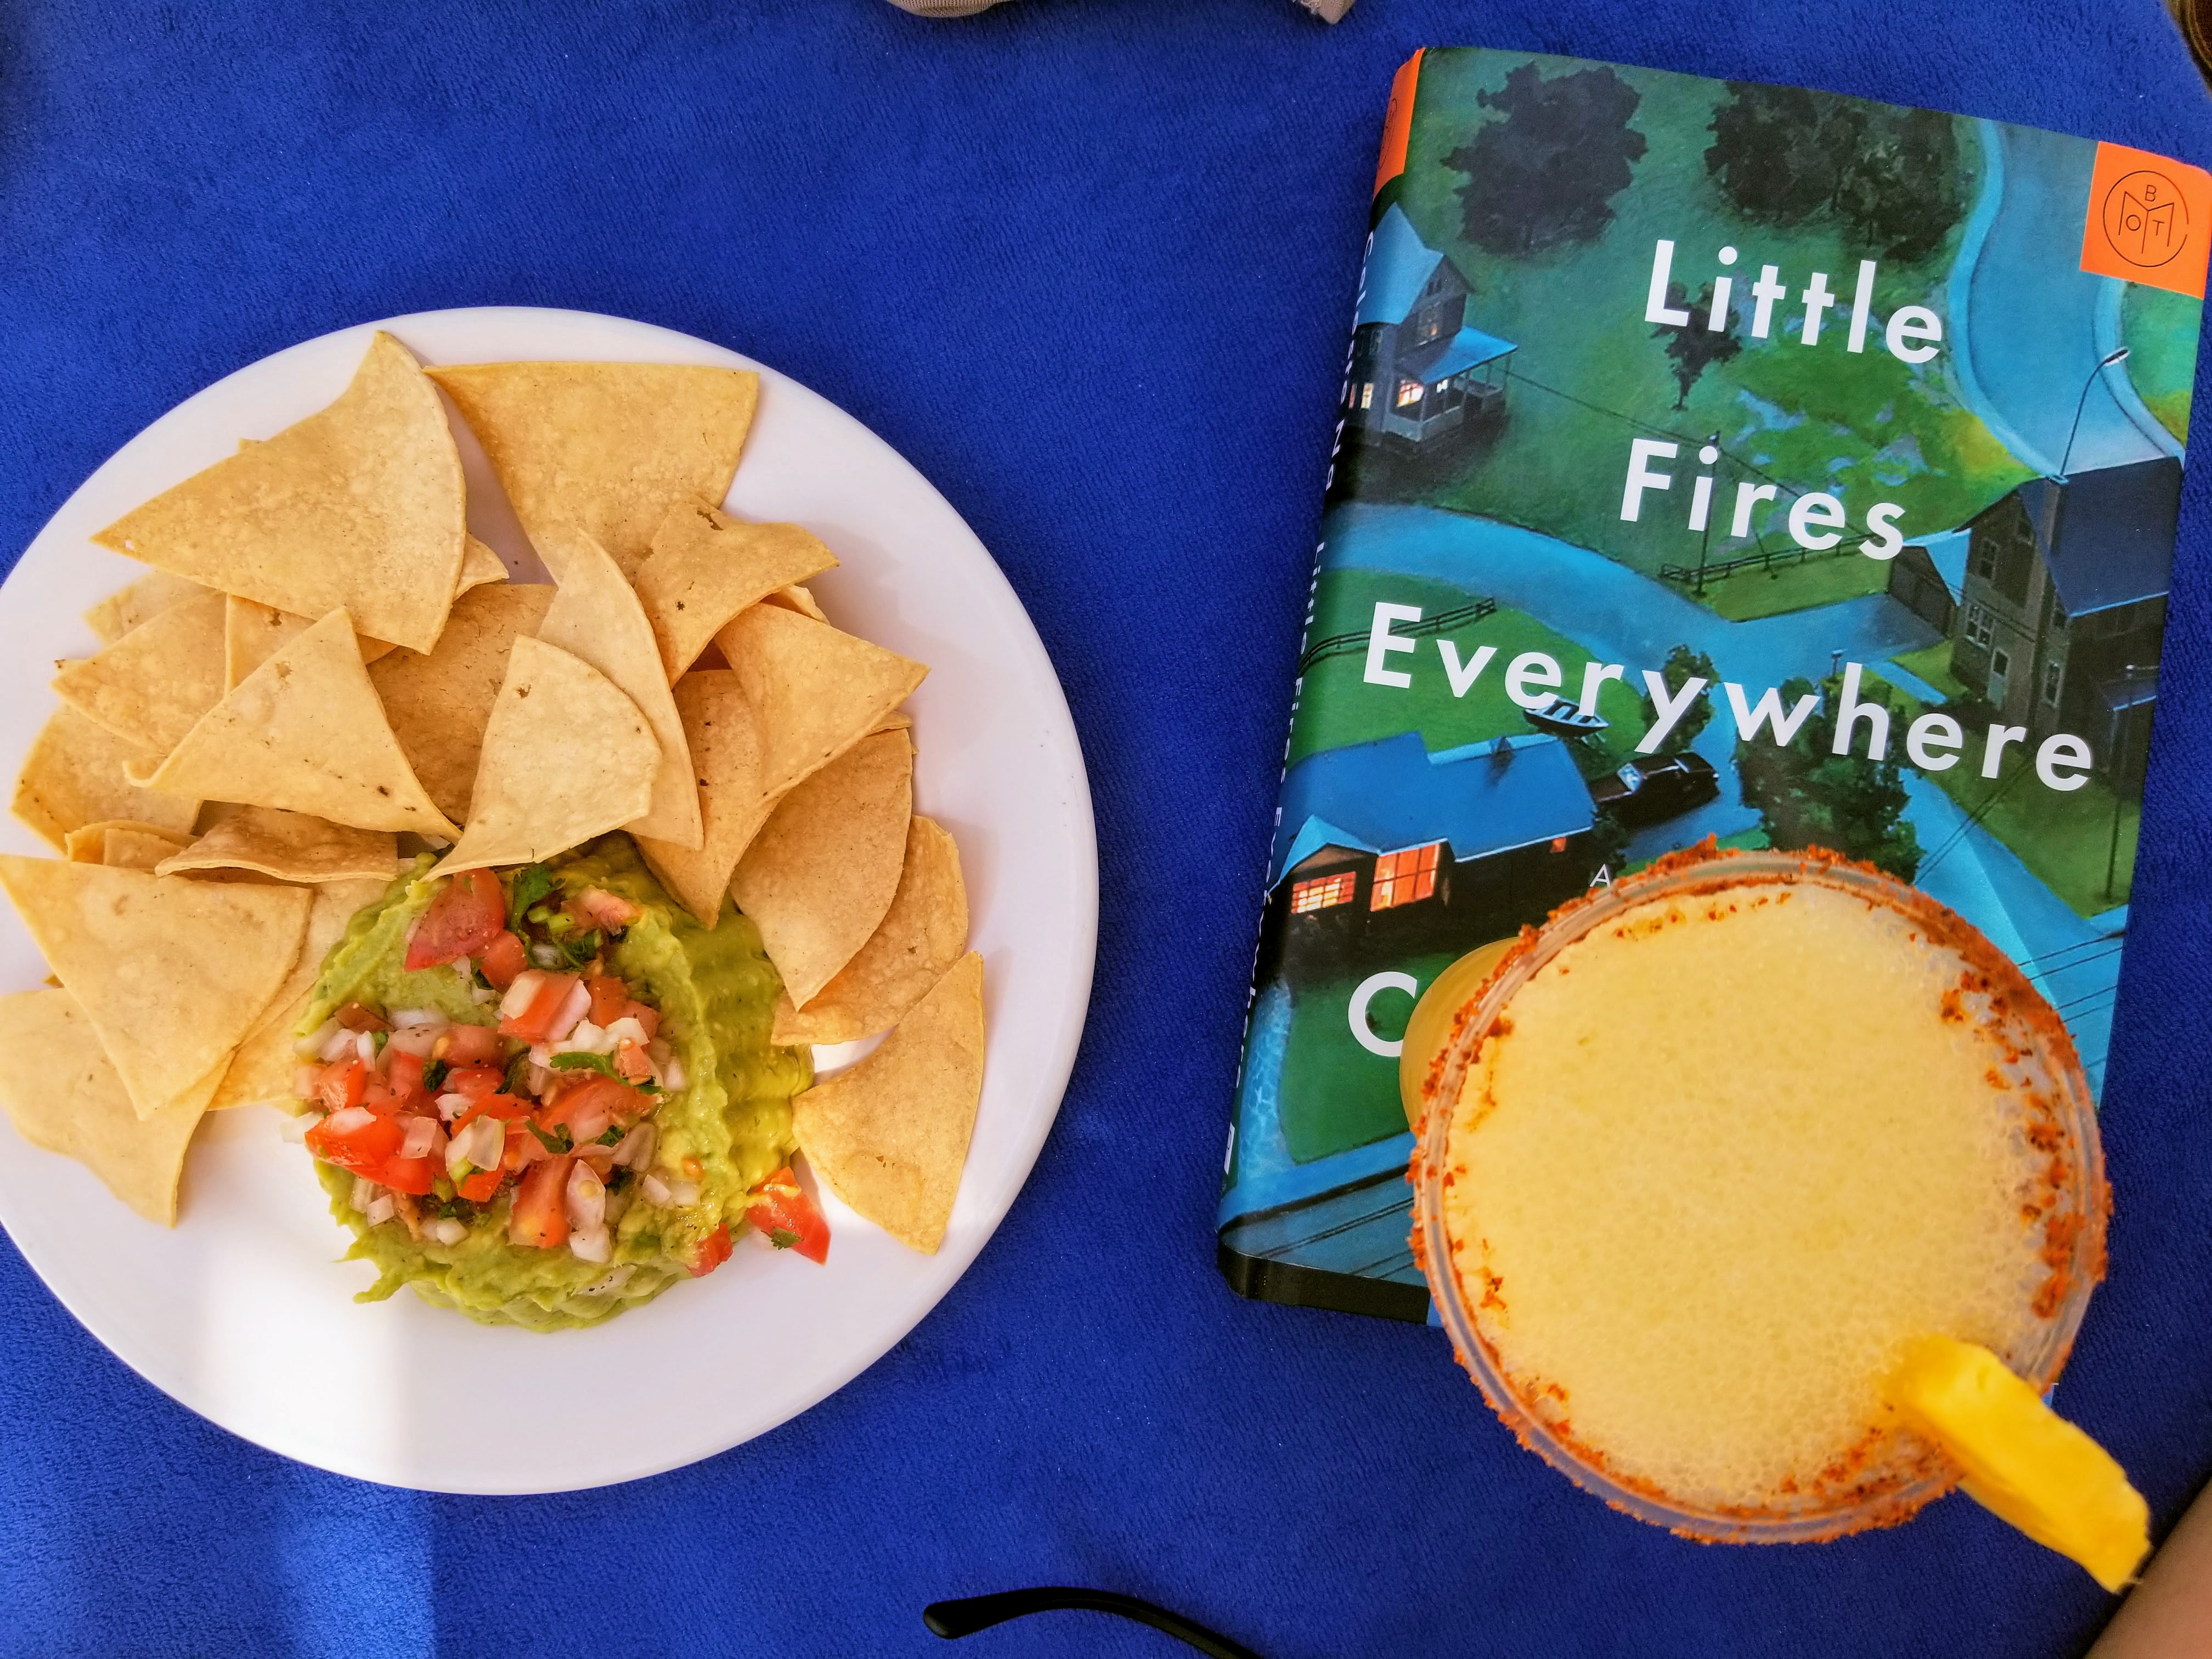 A plate of guacamole and chips is to the left of the book Little Fires Everywhere. On top of the book is a pineapple margarita.